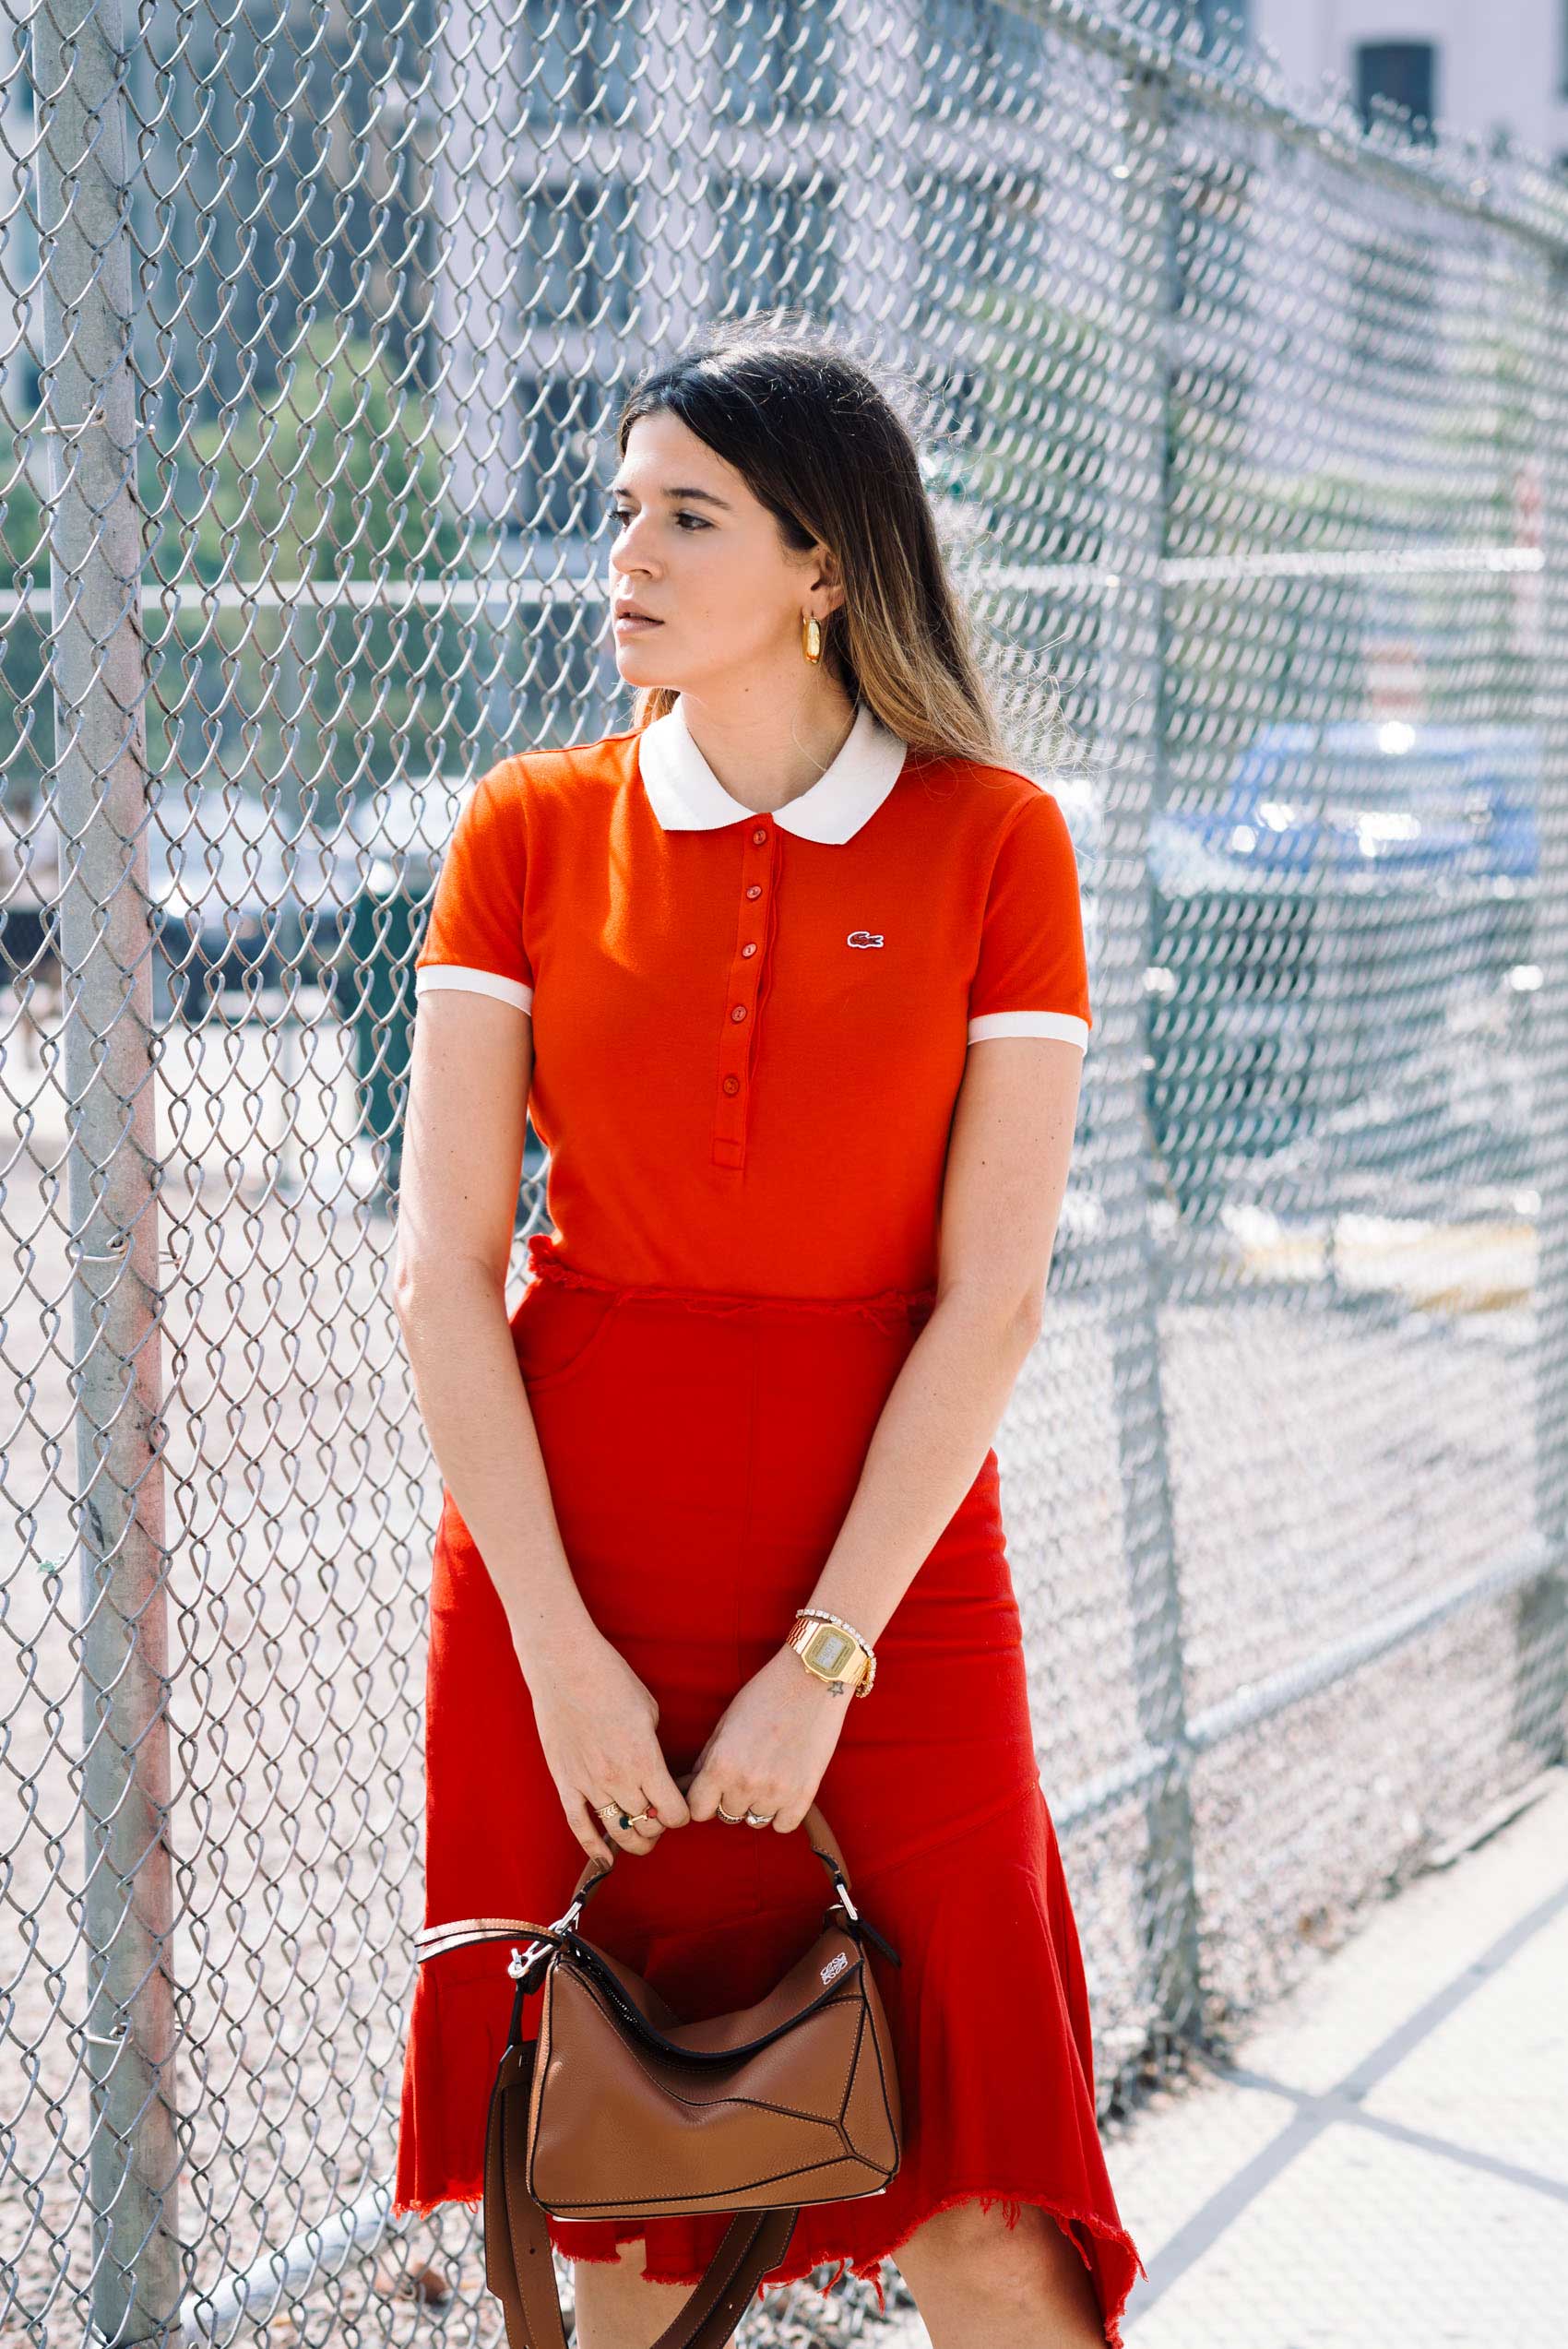 Maristella wearing an all red monochrome outfit with a Lacoste polo shirt and ruffle skirt from Style Mafia